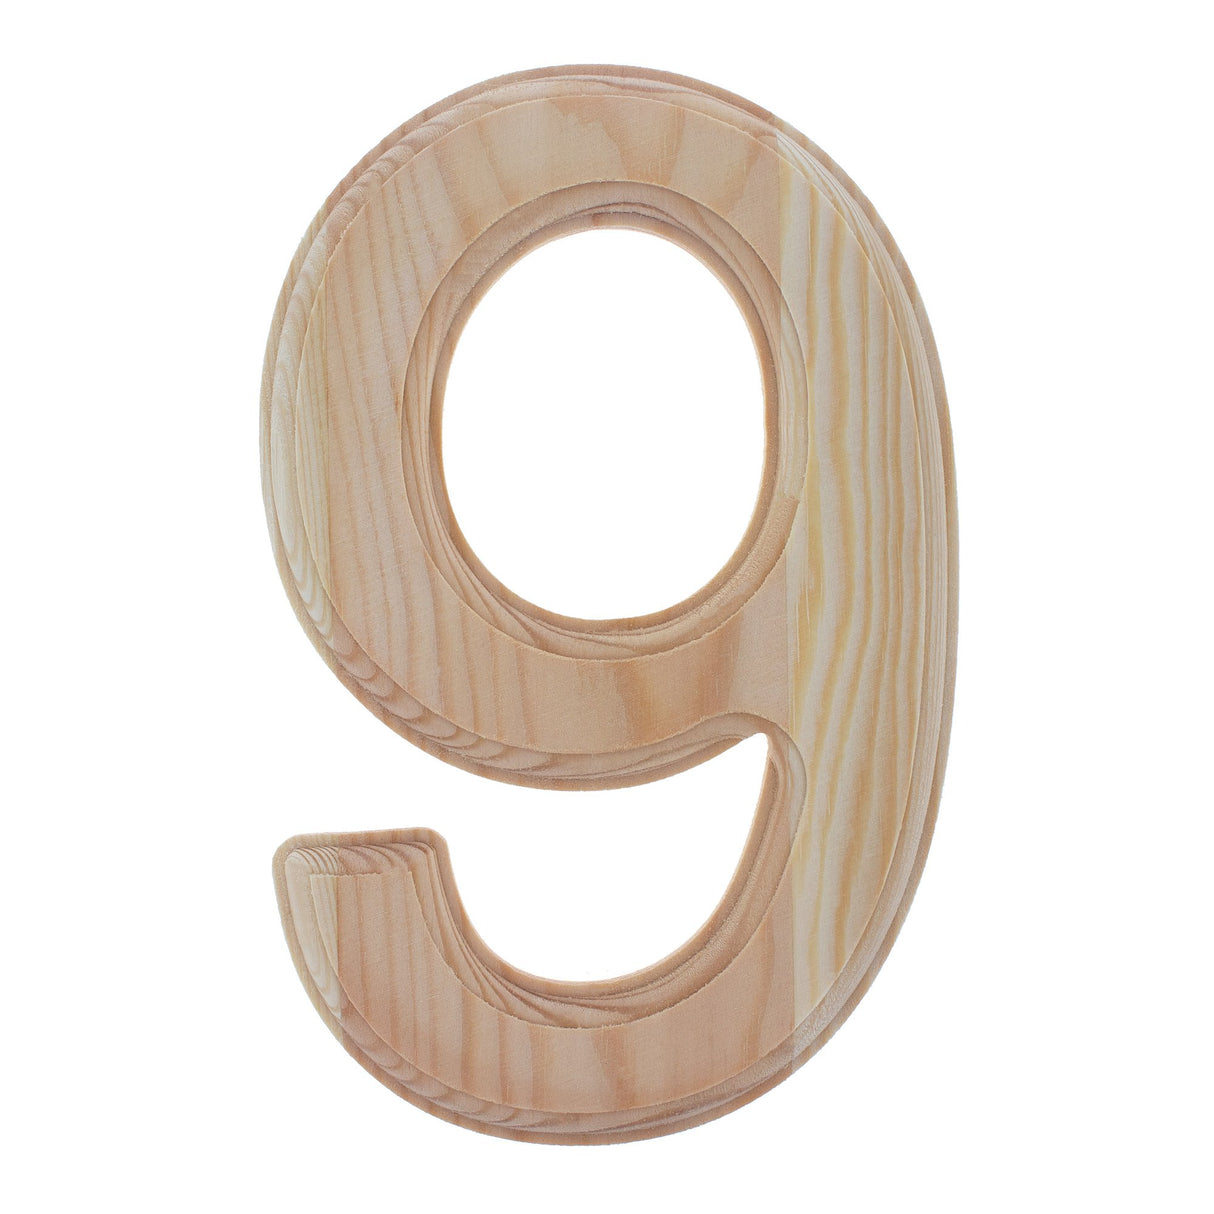 Wood Unfinished Wooden Arial Font Number 9 (Nine) 6.25 Inches in Beige color